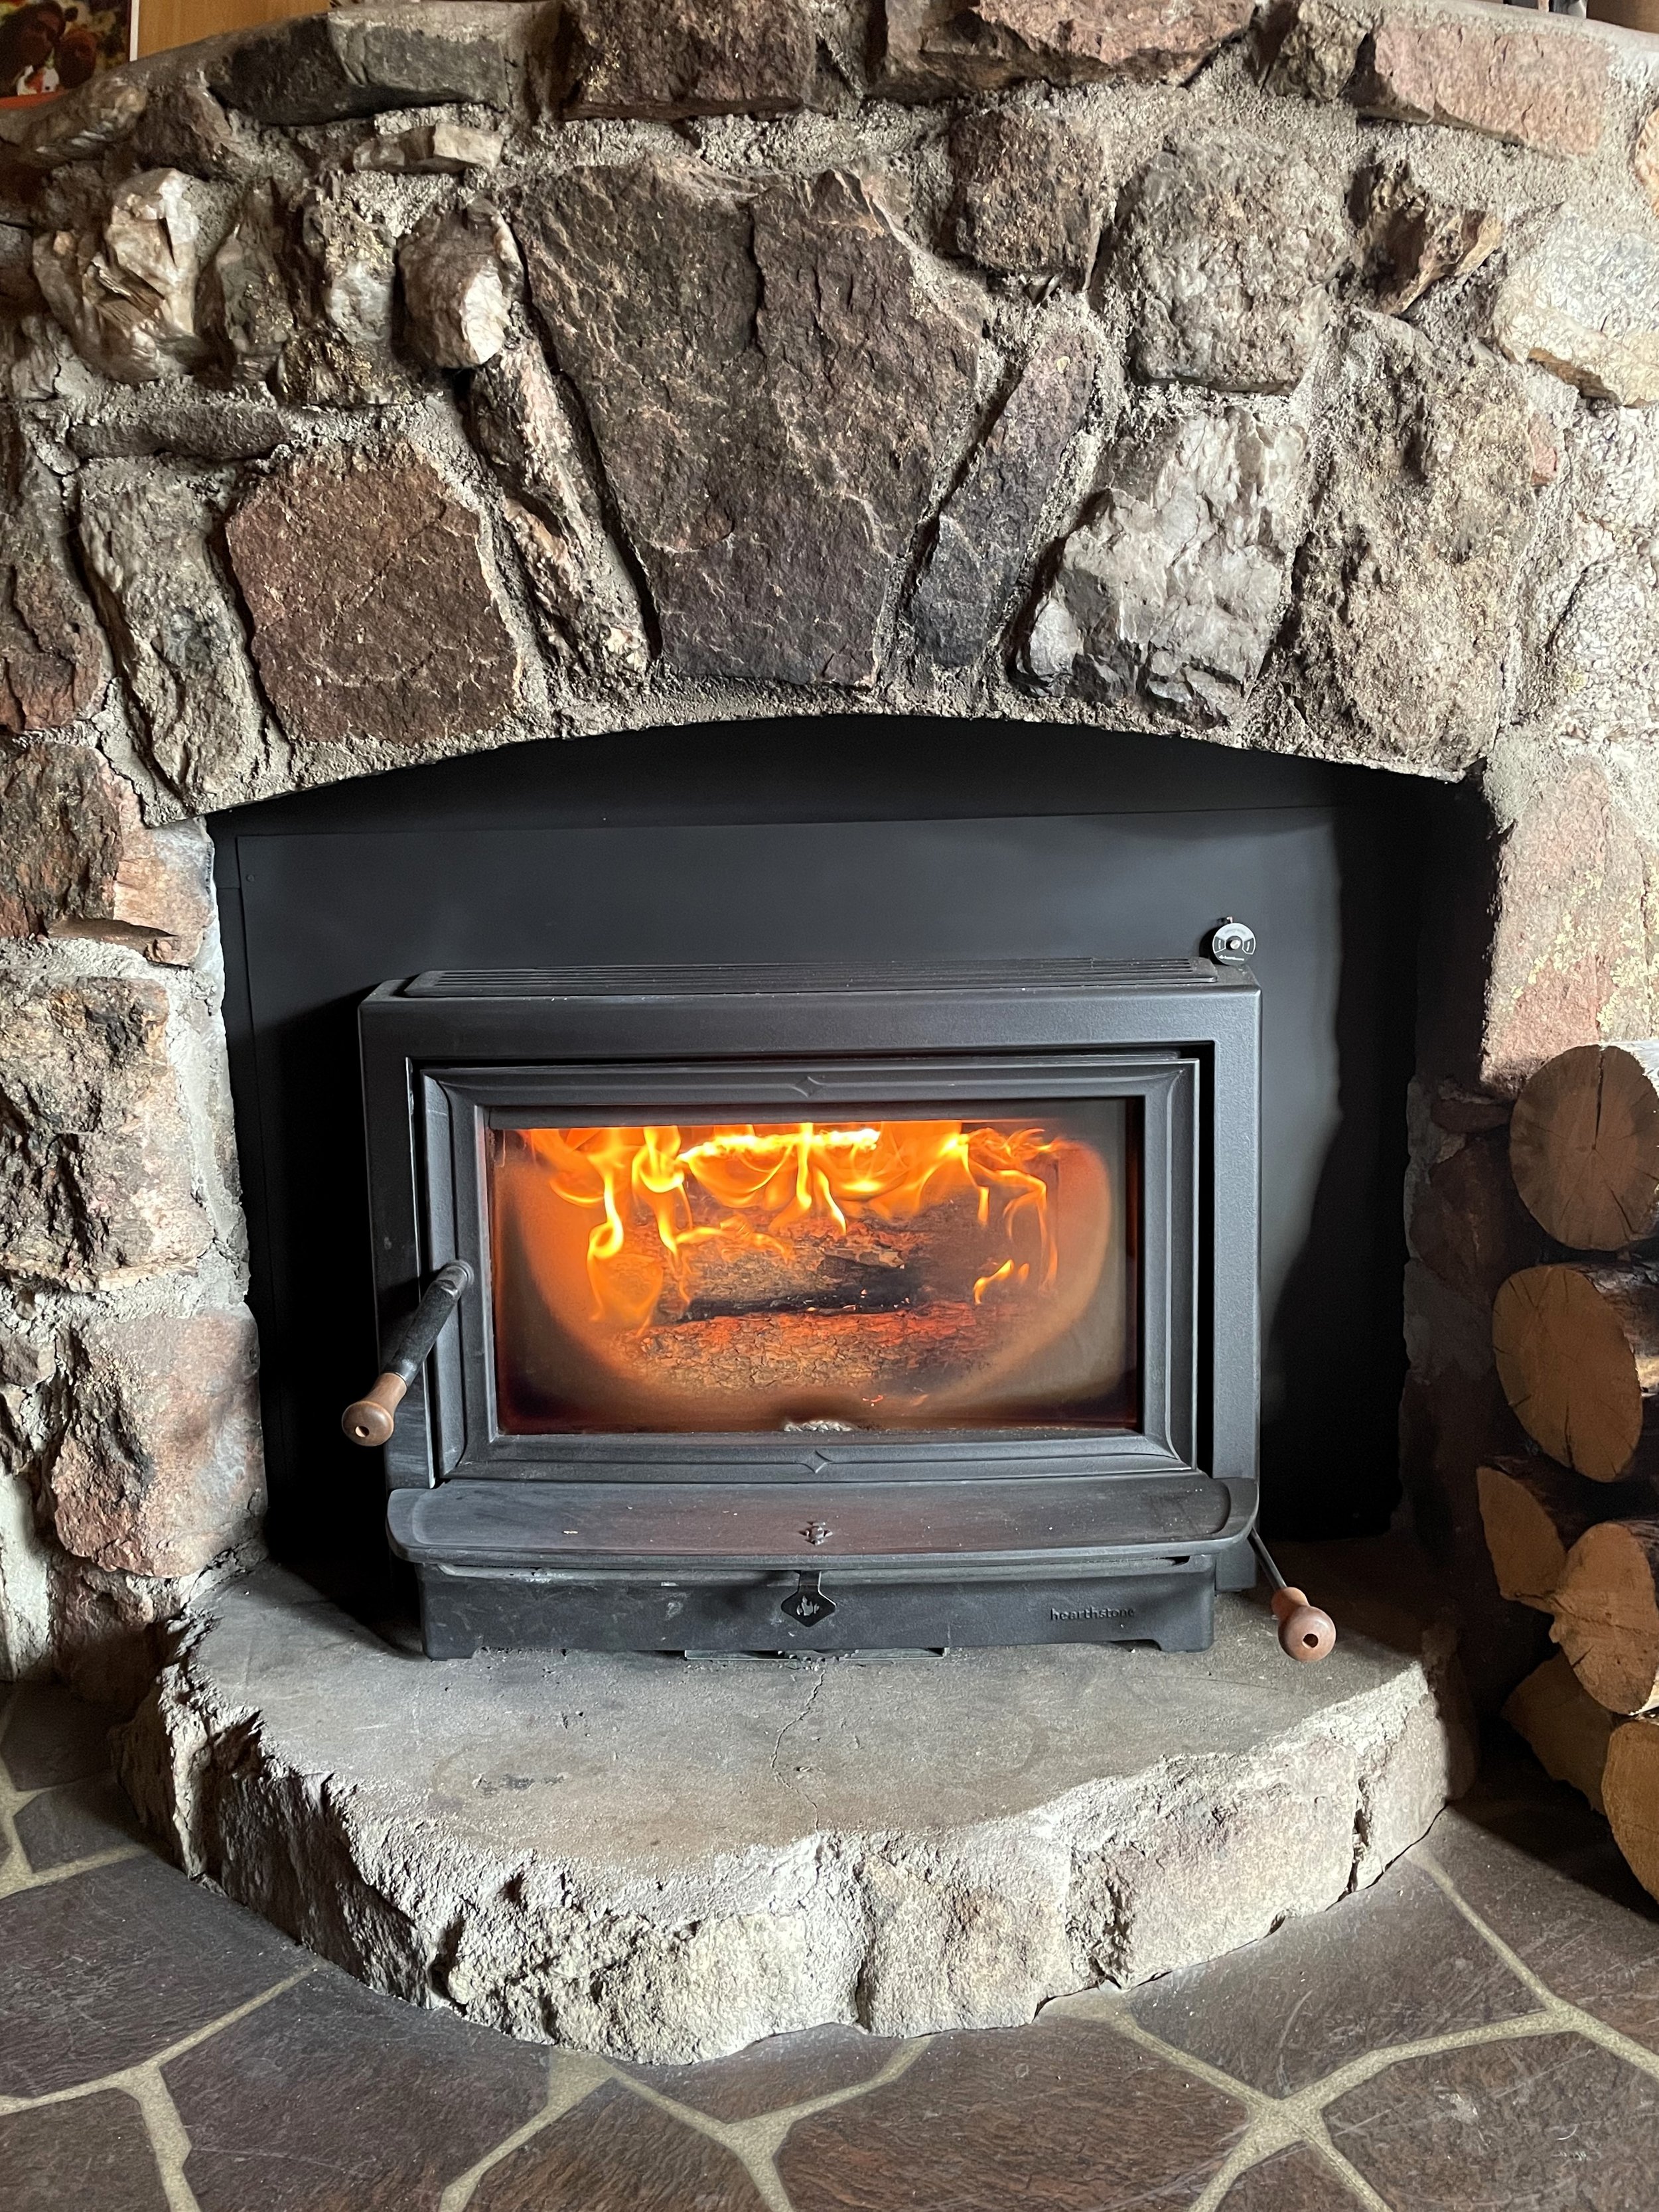 Hearthstone Clydesdale Woodstove Insert Professionlly installed by our EPA-Certified Technicians in Kittredge, CO - Product.jpg